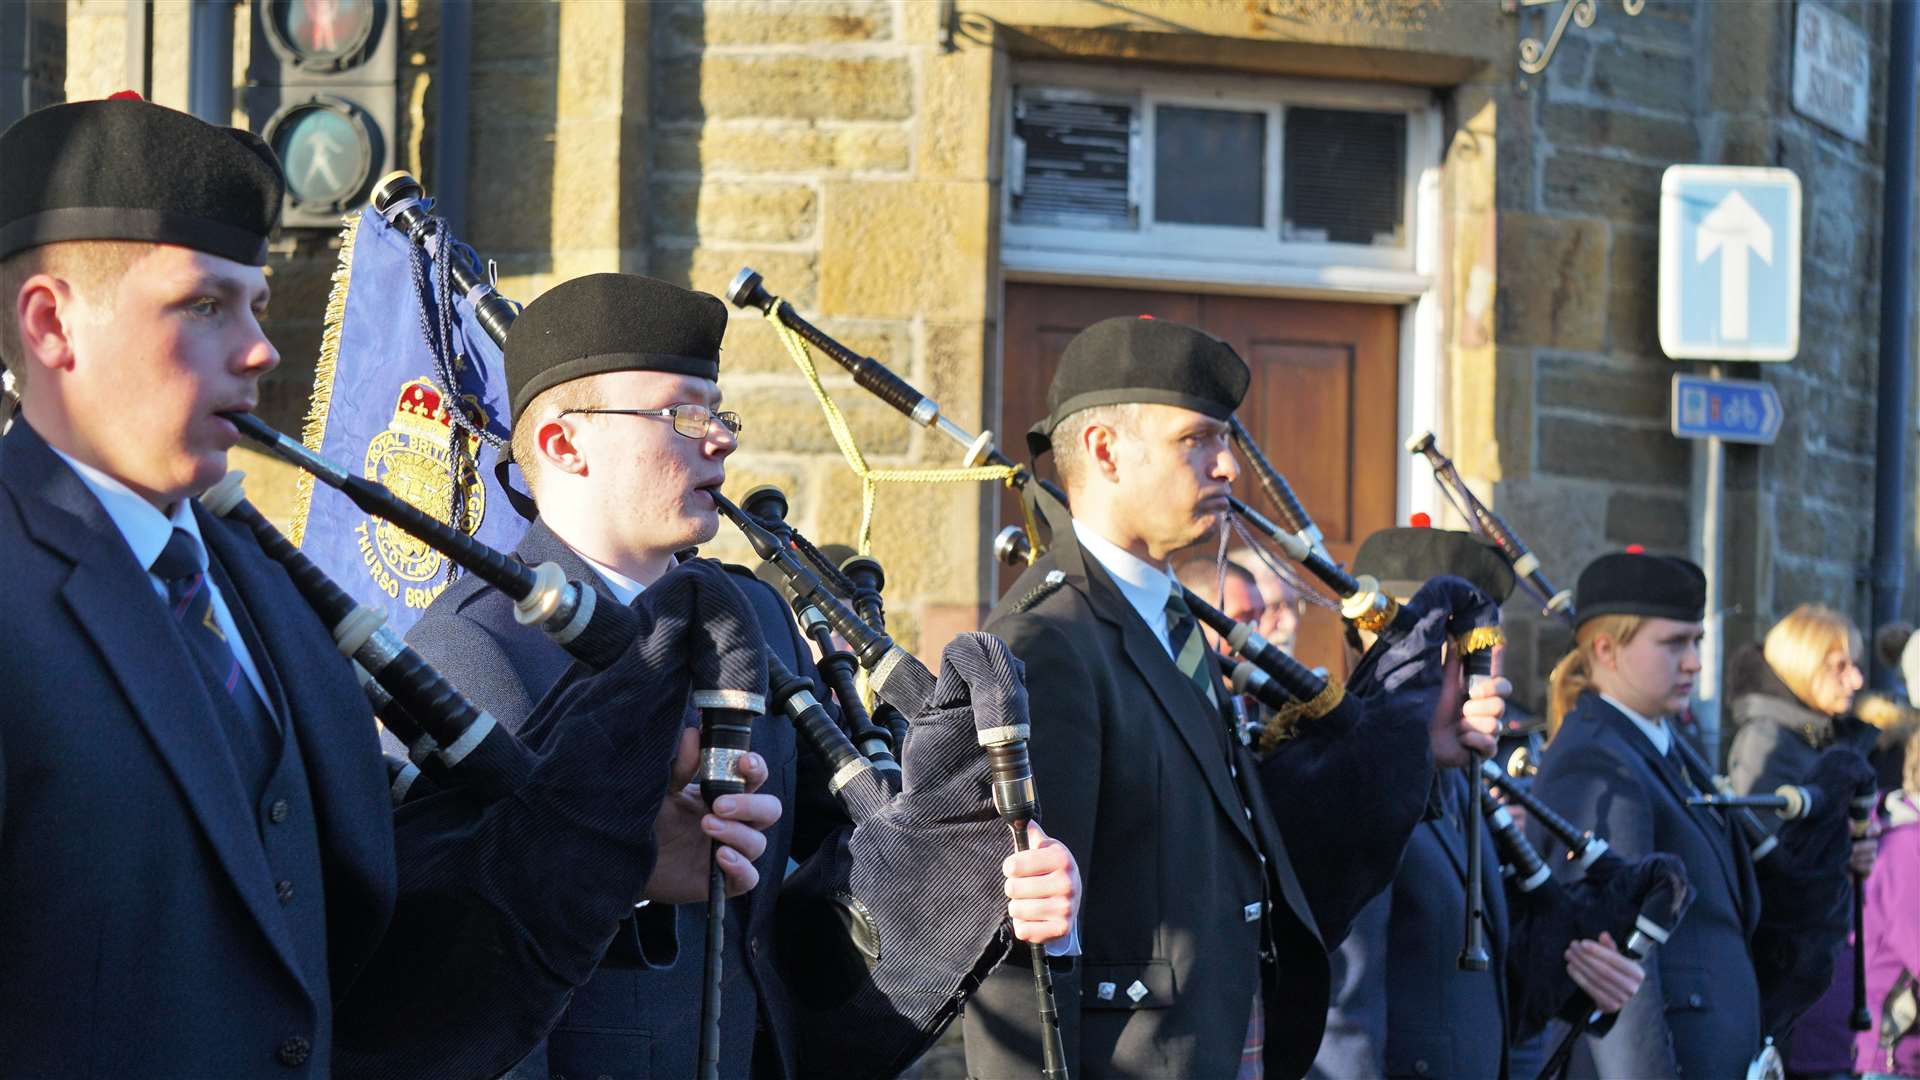 Pipers at the Remembrance event on Sunday morning in Thurso. Picture: DGS